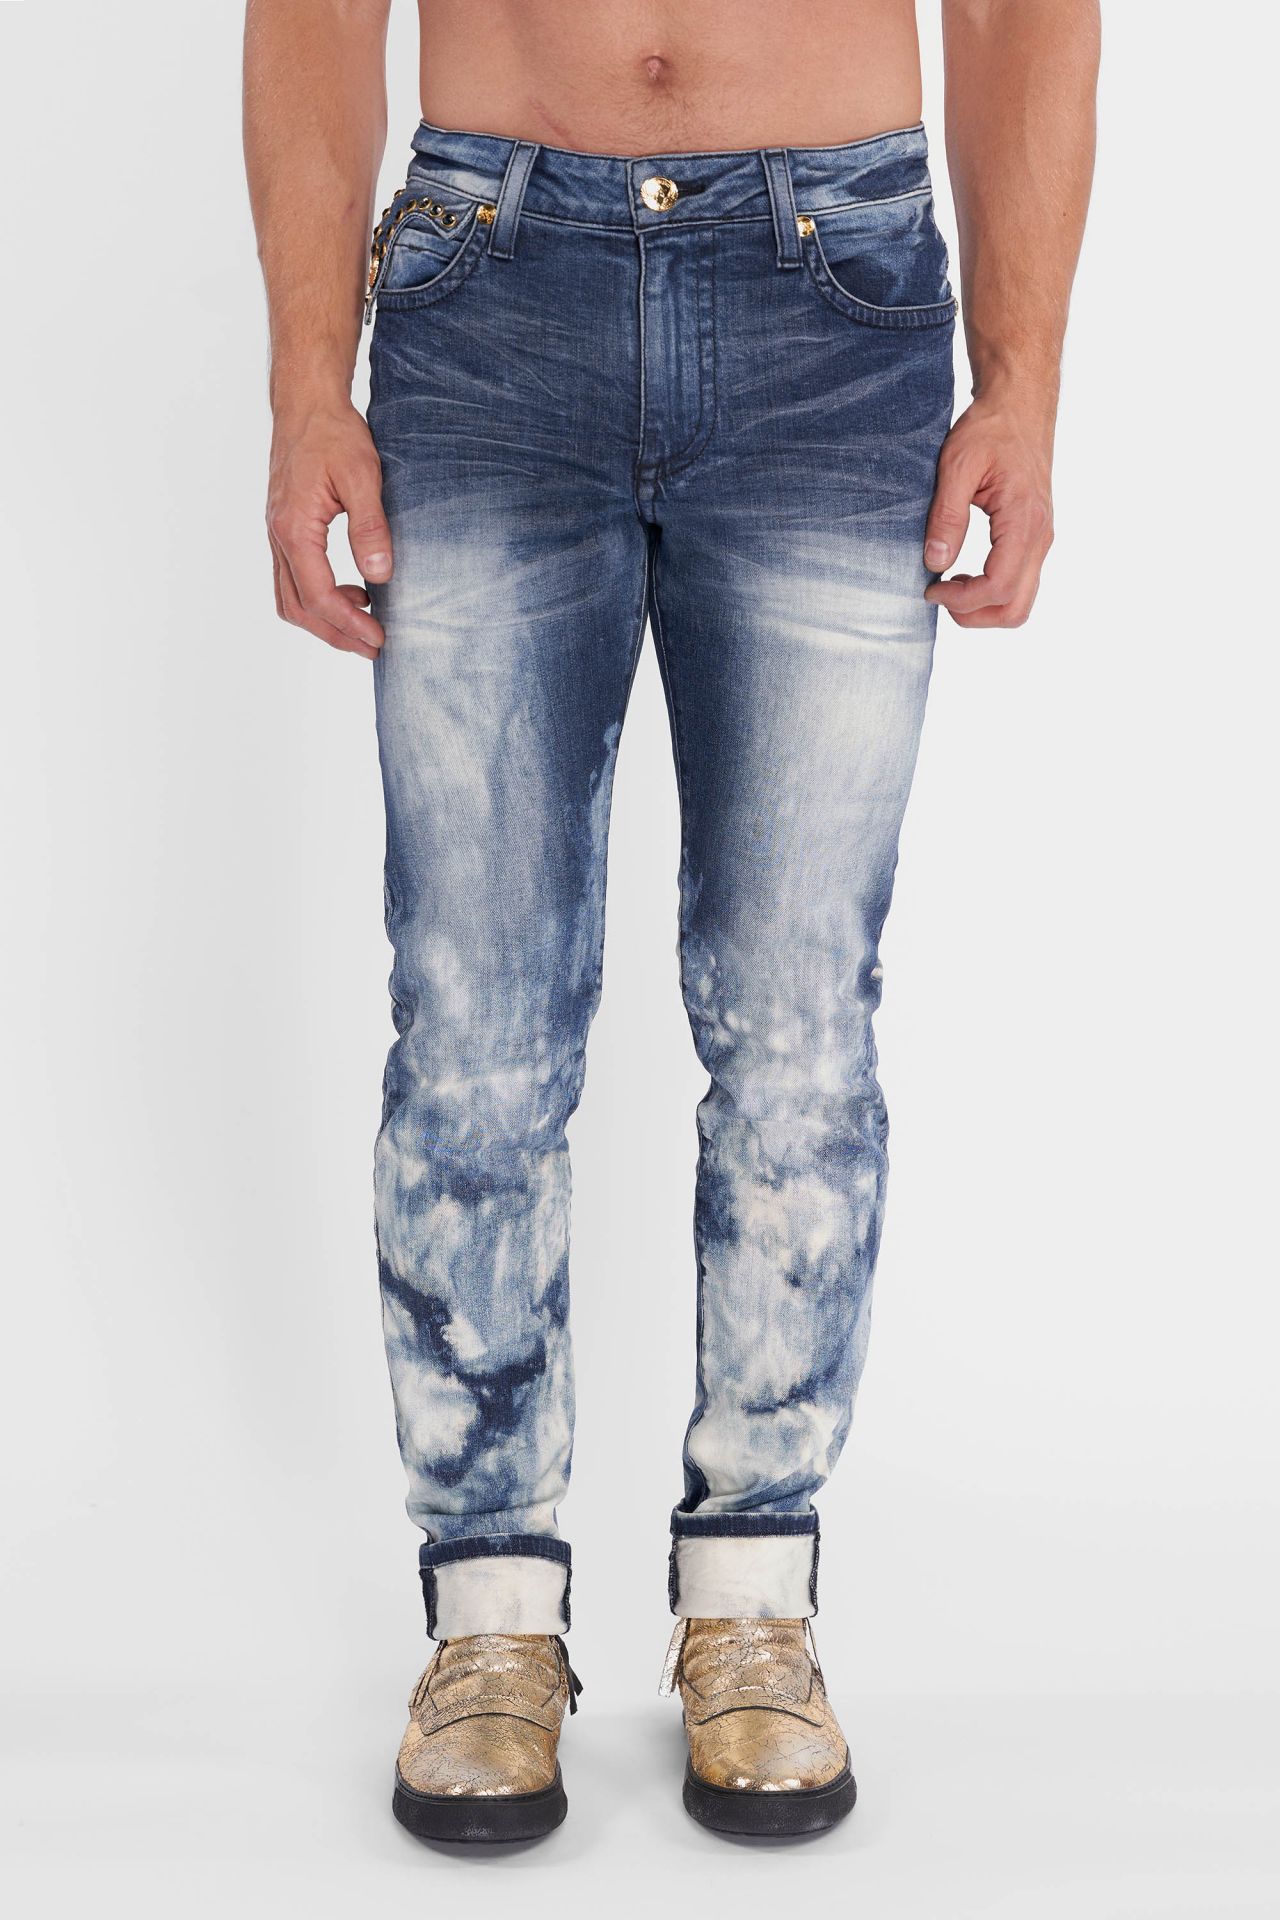 KILLER FLAP SKINNY MENS JEANS IN CLOUD JAPAN WASH WITH BLUE CRYSTALS